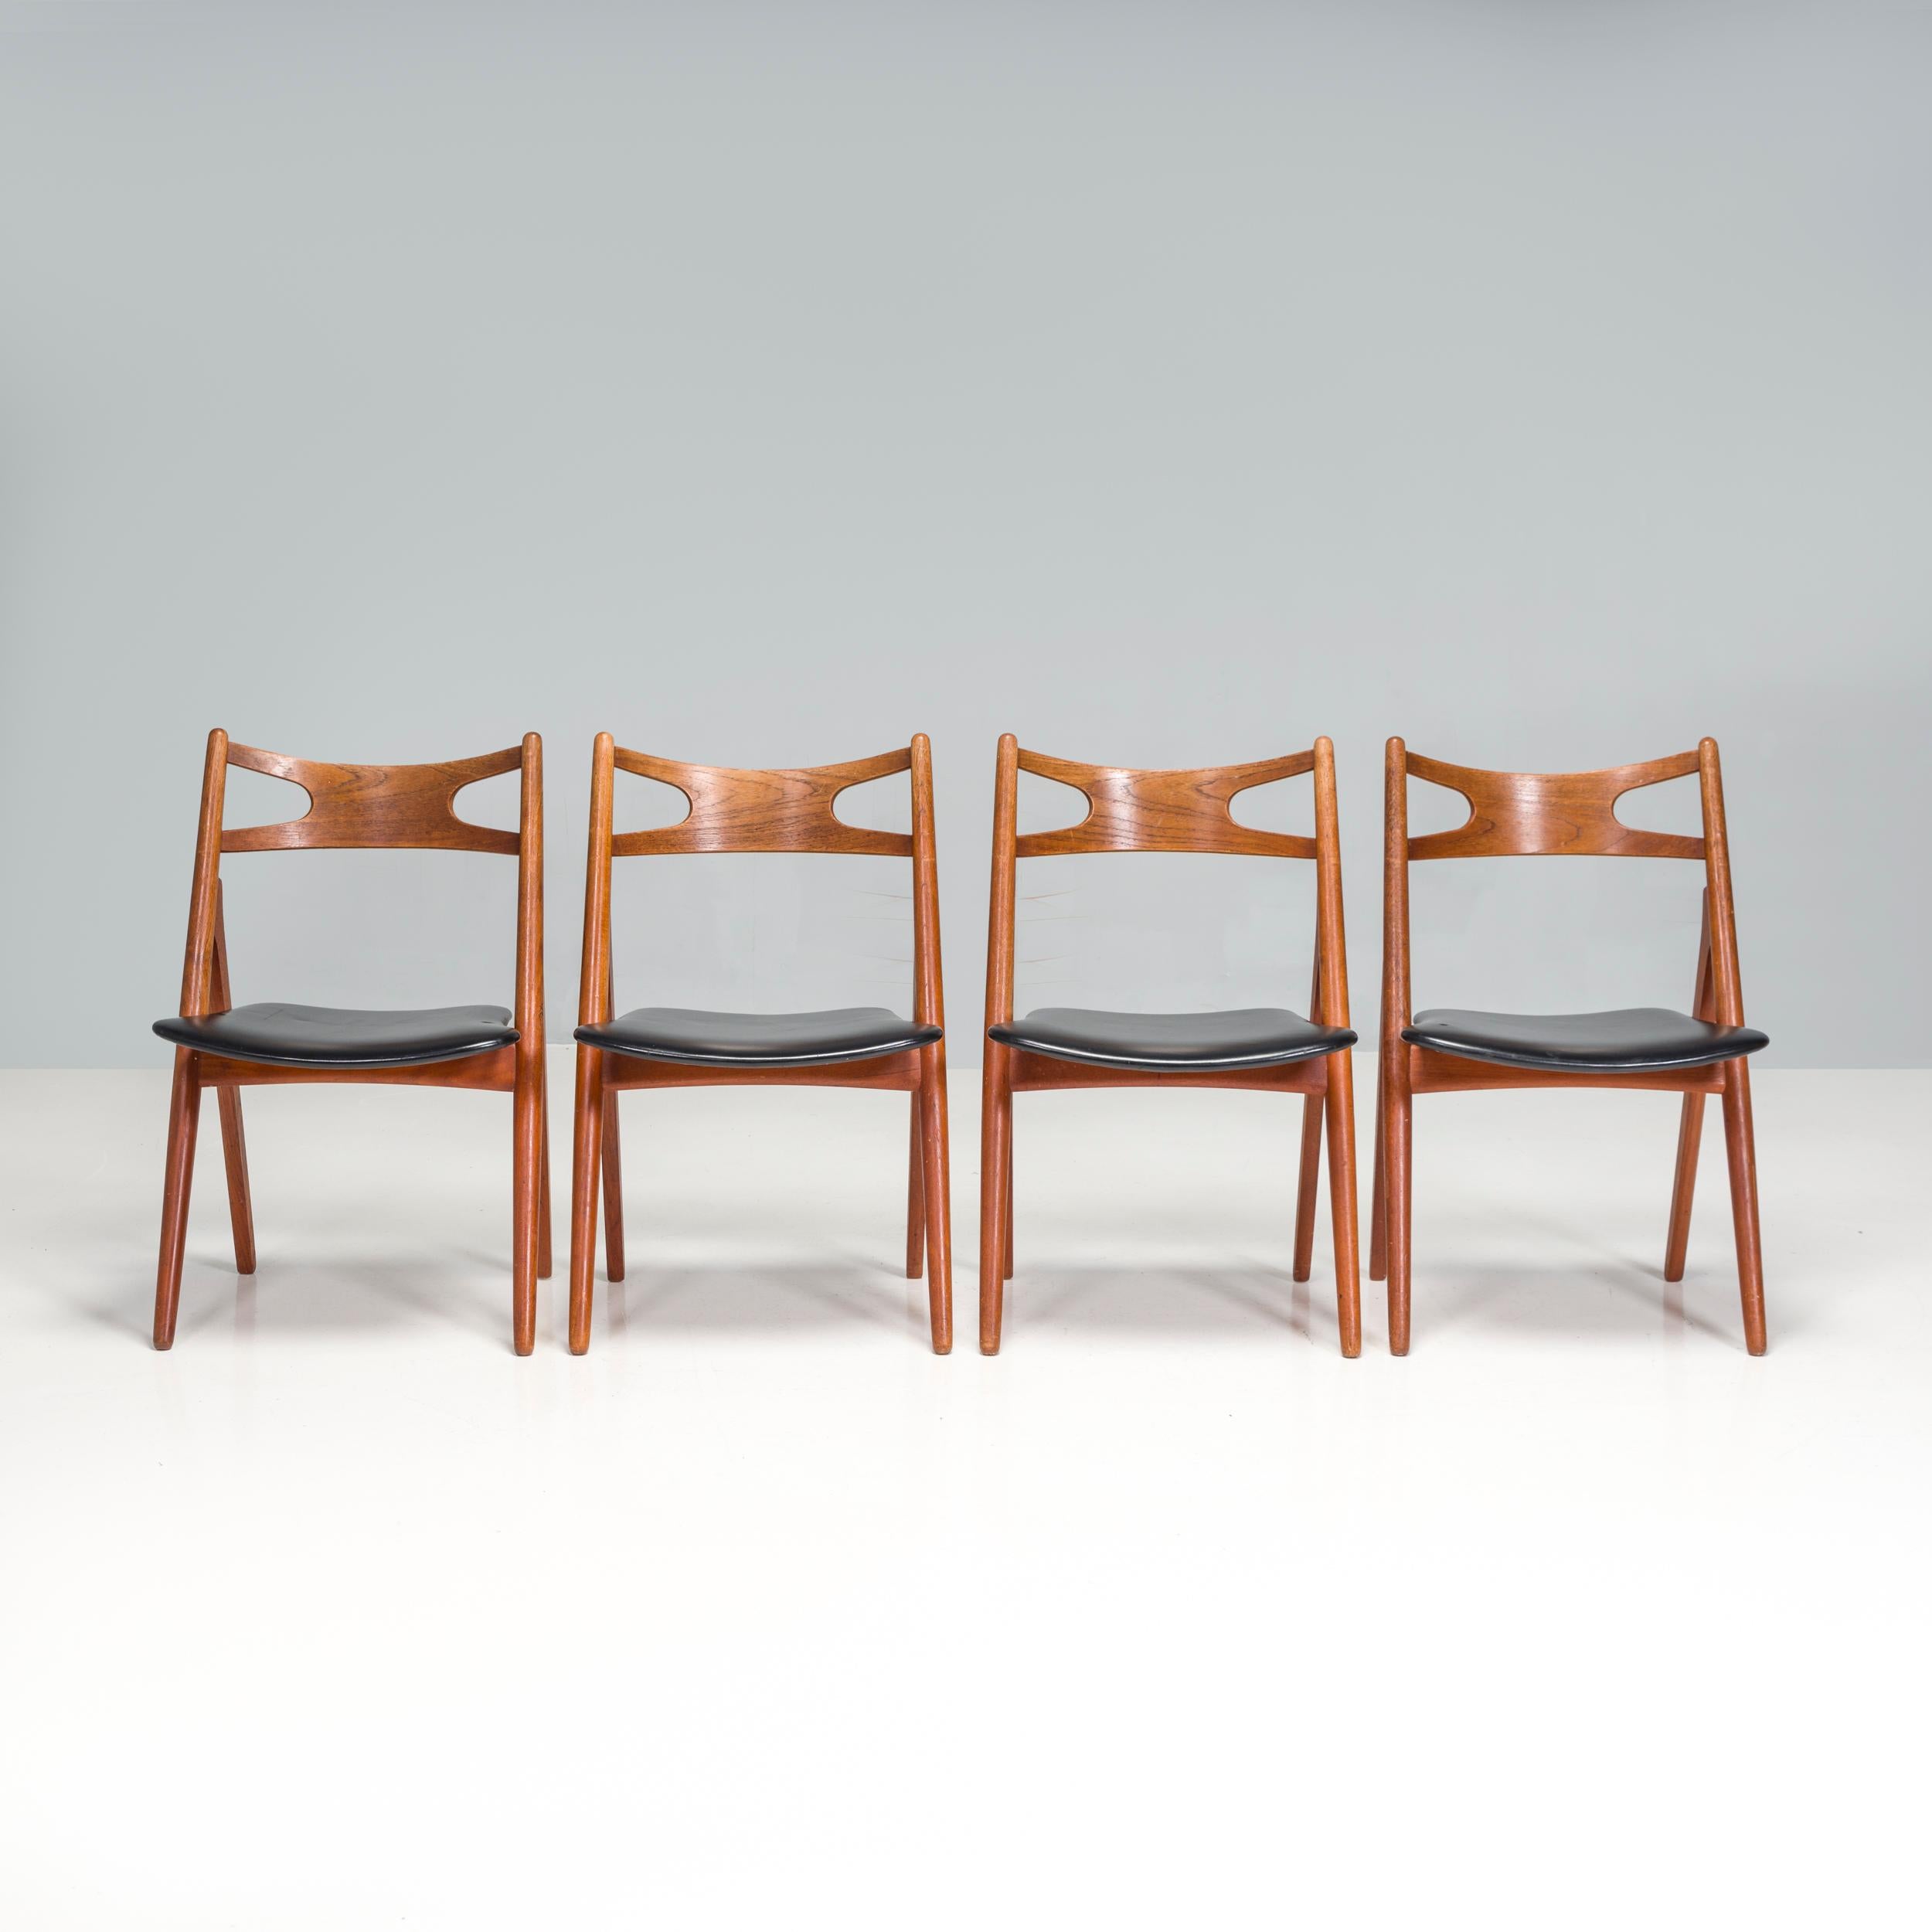 Originally designed by Hans J. Wegner in 1952, the CH29P Sawbuck Chair was manufactured by Carl Hansen & Son until the 1970s and was then reissued again 20 years later.

Inspired by the sawbucks and saw horses used by carpenters, the chair